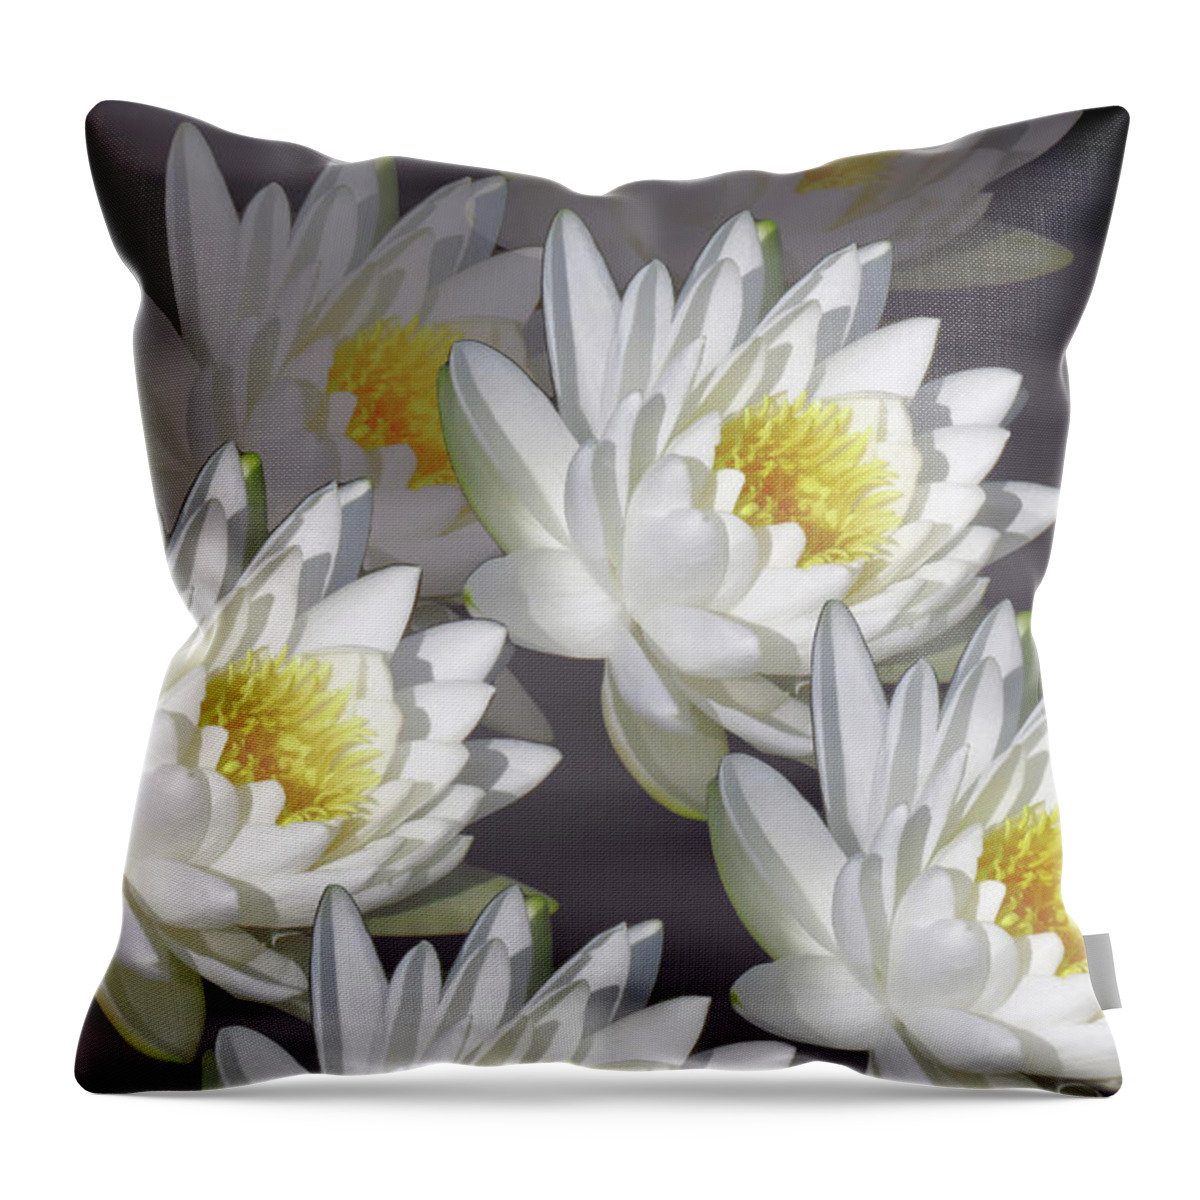 Water Lily Throw Pillow featuring the photograph The White Garden by Rosalie Scanlon